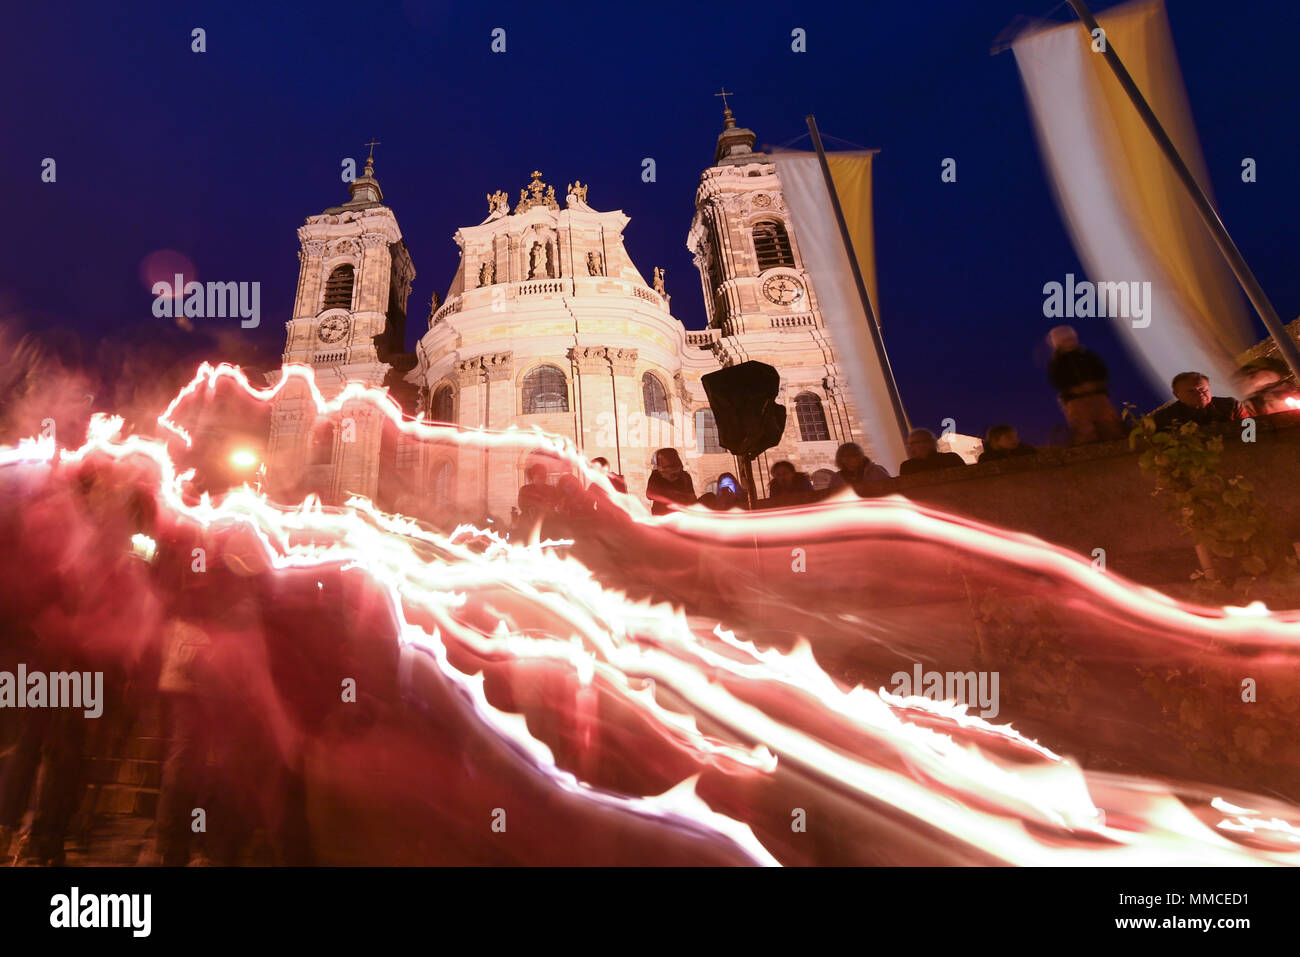 10 May 2018, Germany, Weingarten: Numerous people walk pass the basilica during a candlelight procession. Only light strips can be seen due to the bulb exposure during the blue hour. A day before the Blutritt, people ride to the hill in Weingarten during the largest riding procession in Europe. Photo: Felix Kästle/dpa Stock Photo